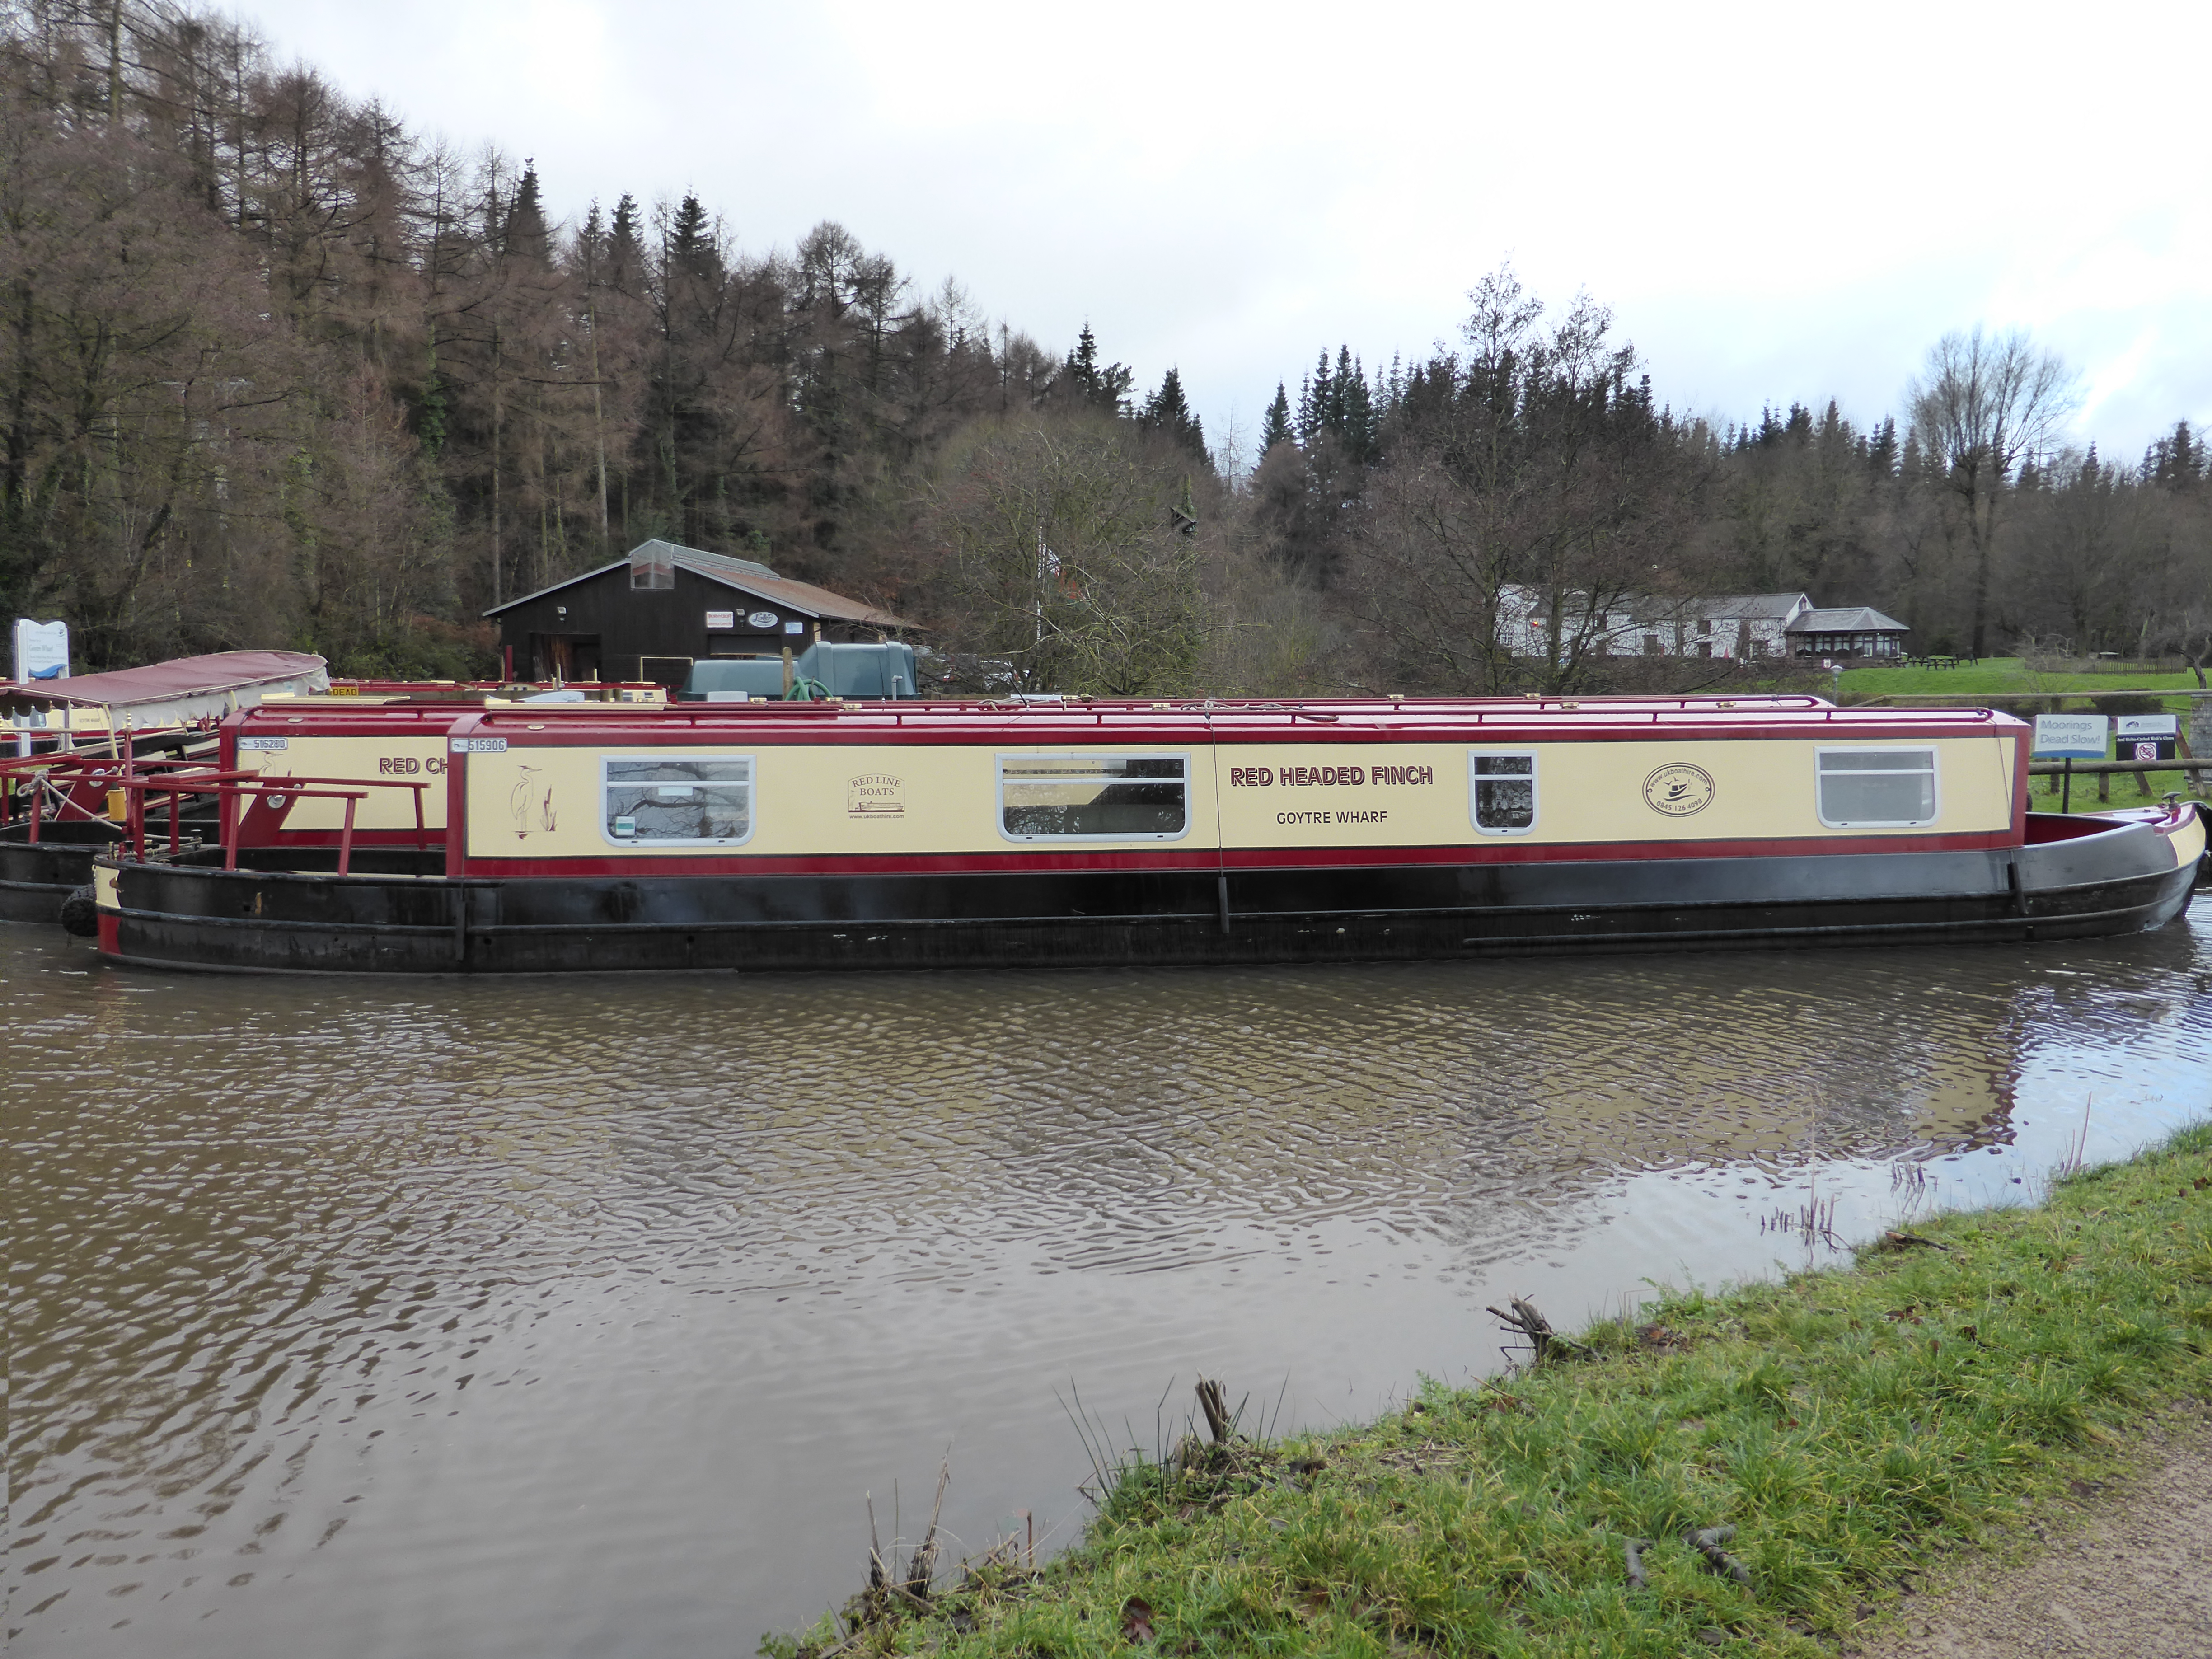 The Finch class canal boat